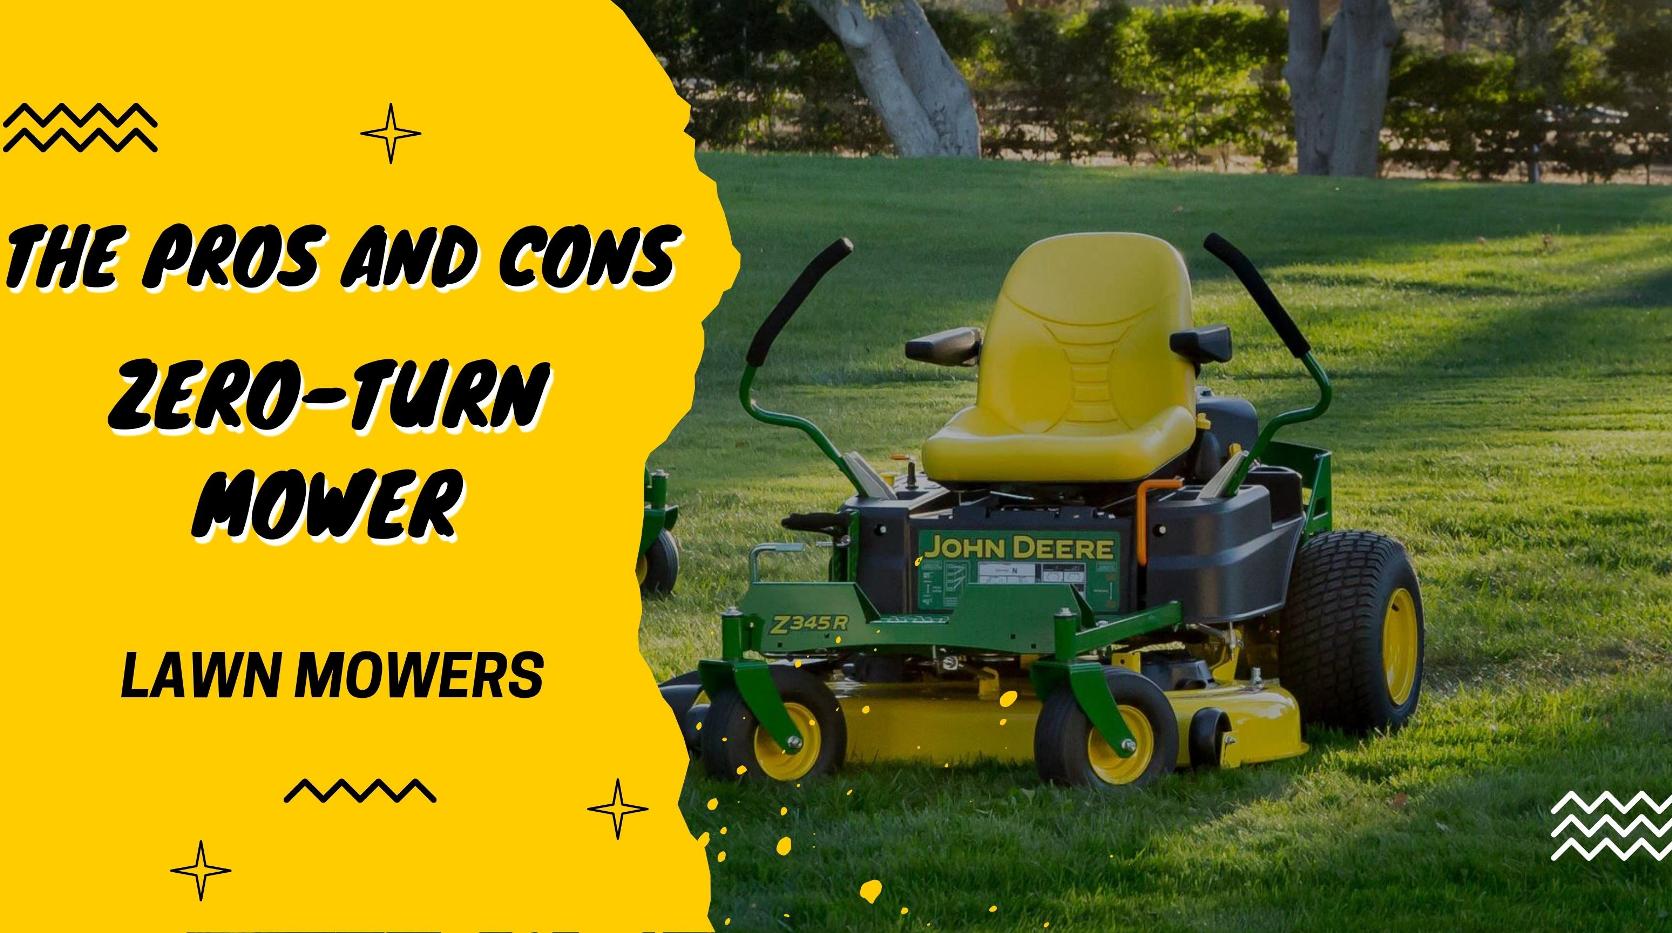 Pros and Cons of a Zero-turn Mower